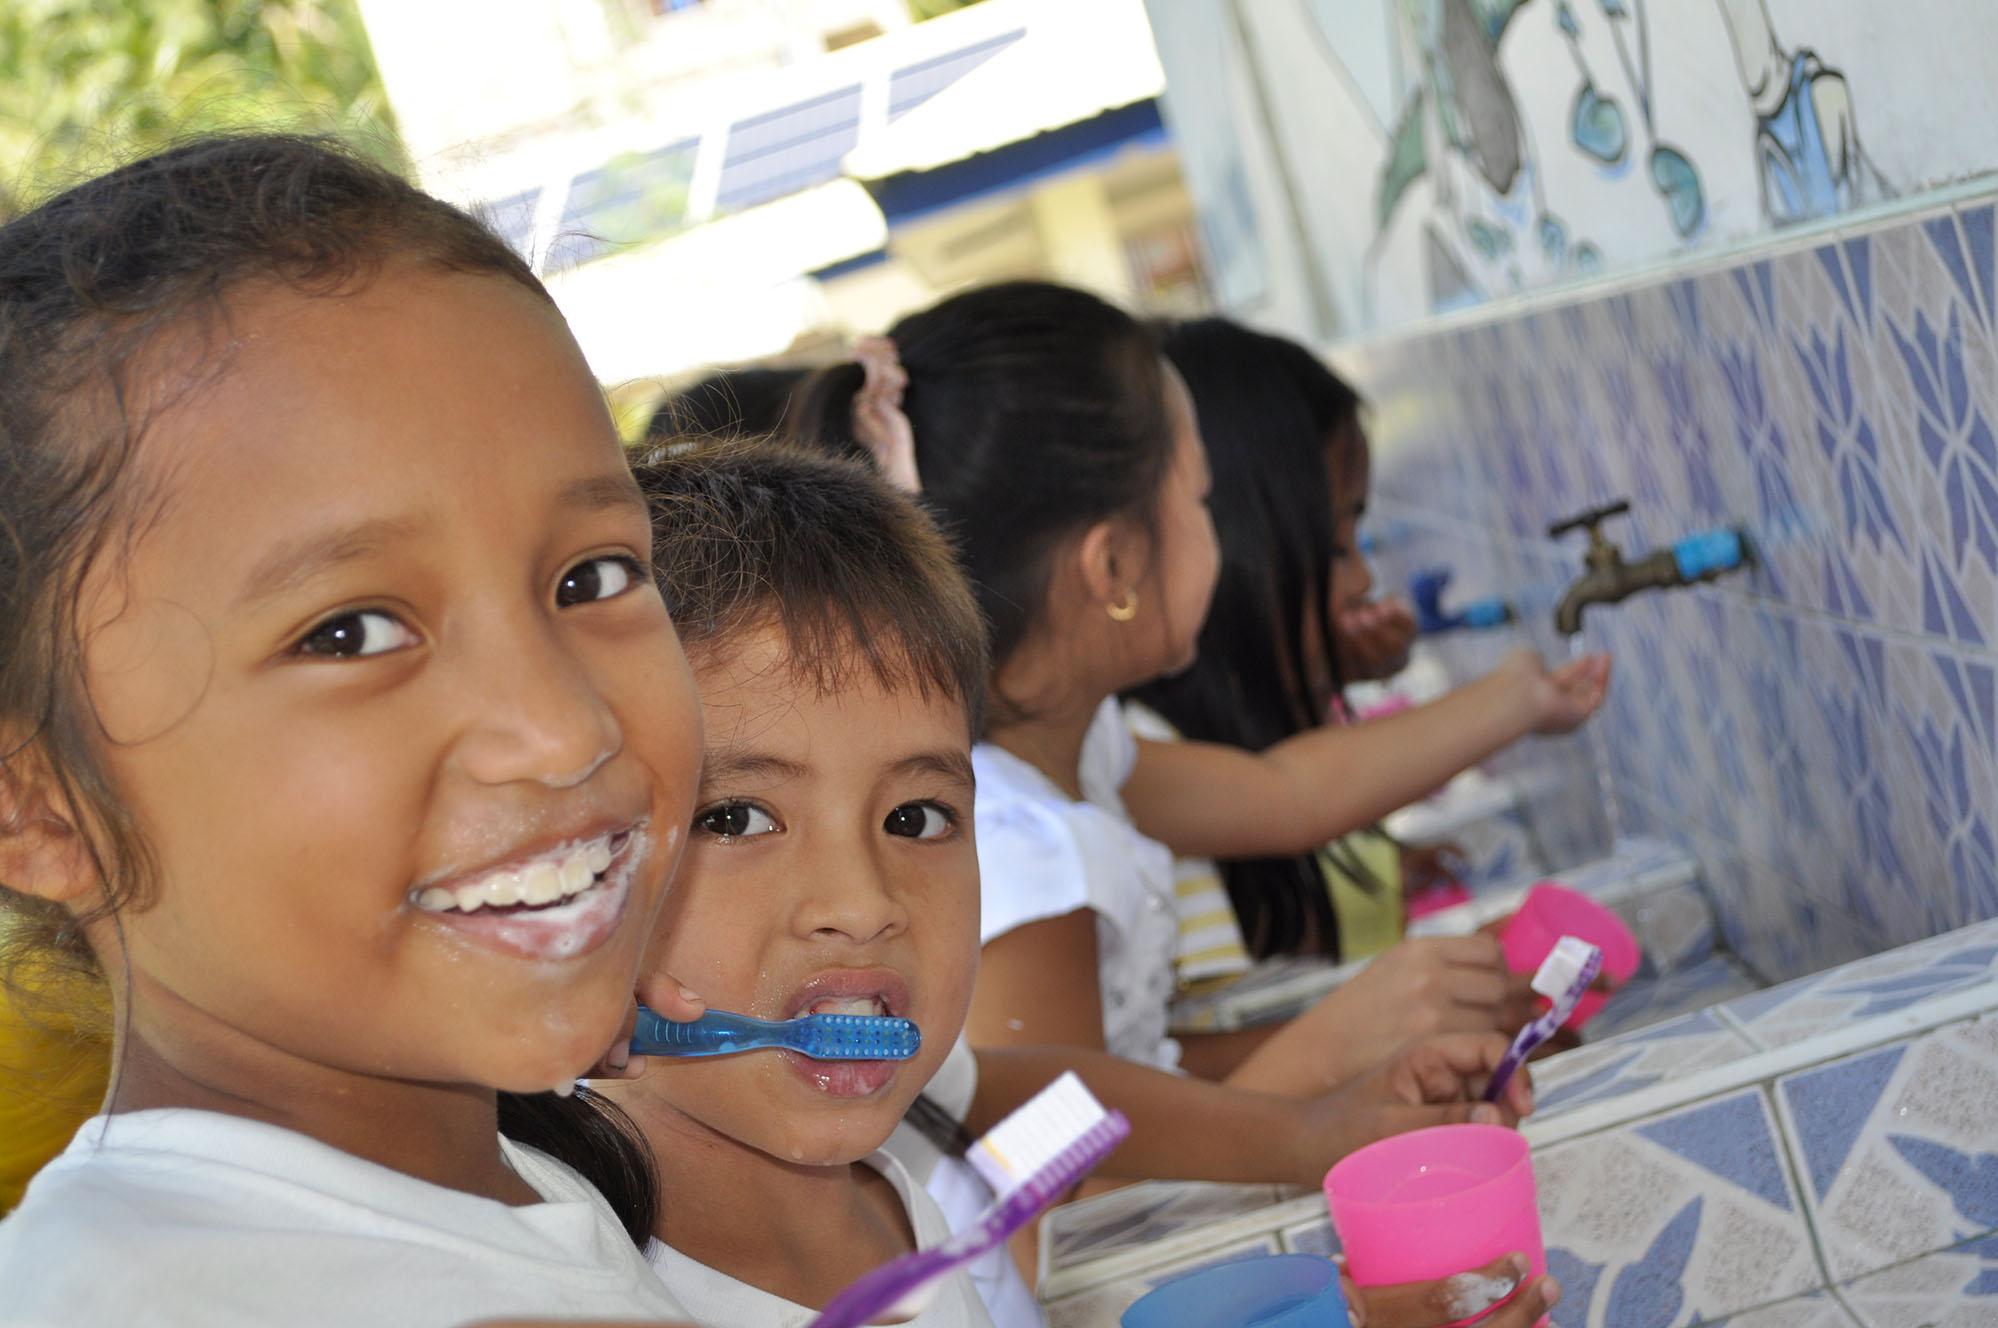 San Roque Elementary School - Health & Nutrition Program - Educational Project of the Child & Family Foundation